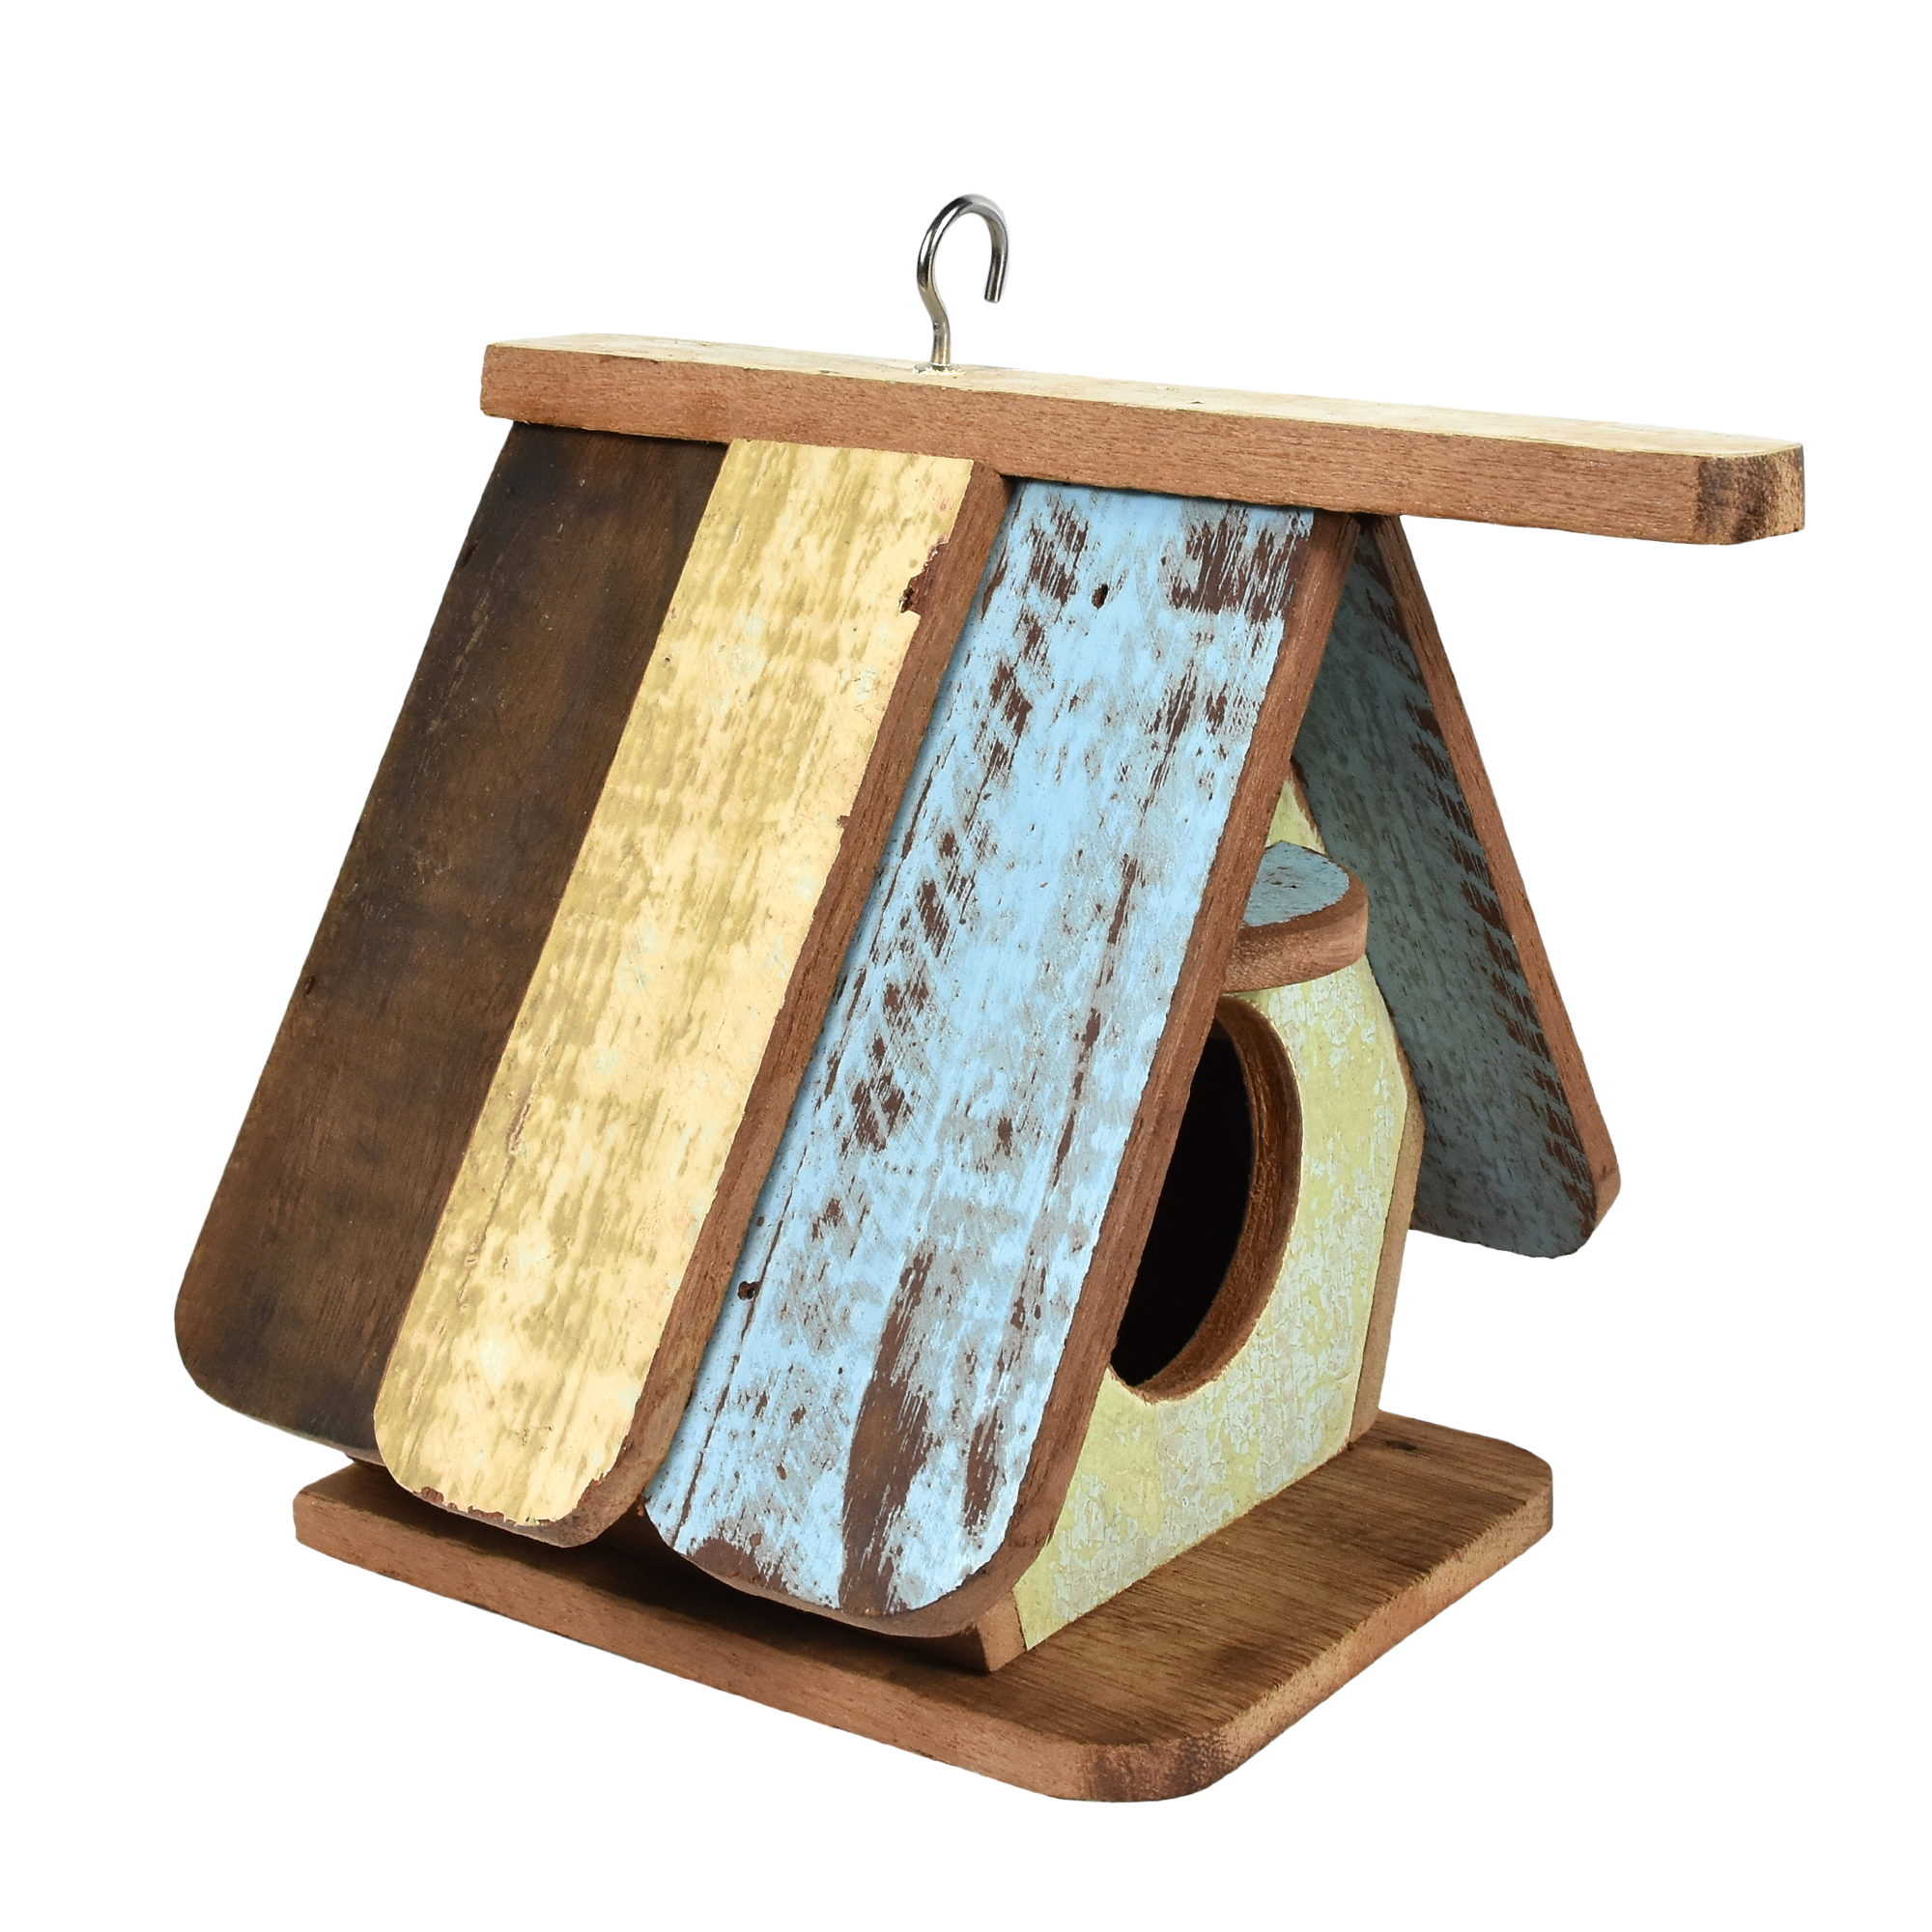 Handcrafted Pastel Bird House Wood Hanging Decor - image 2 of 5